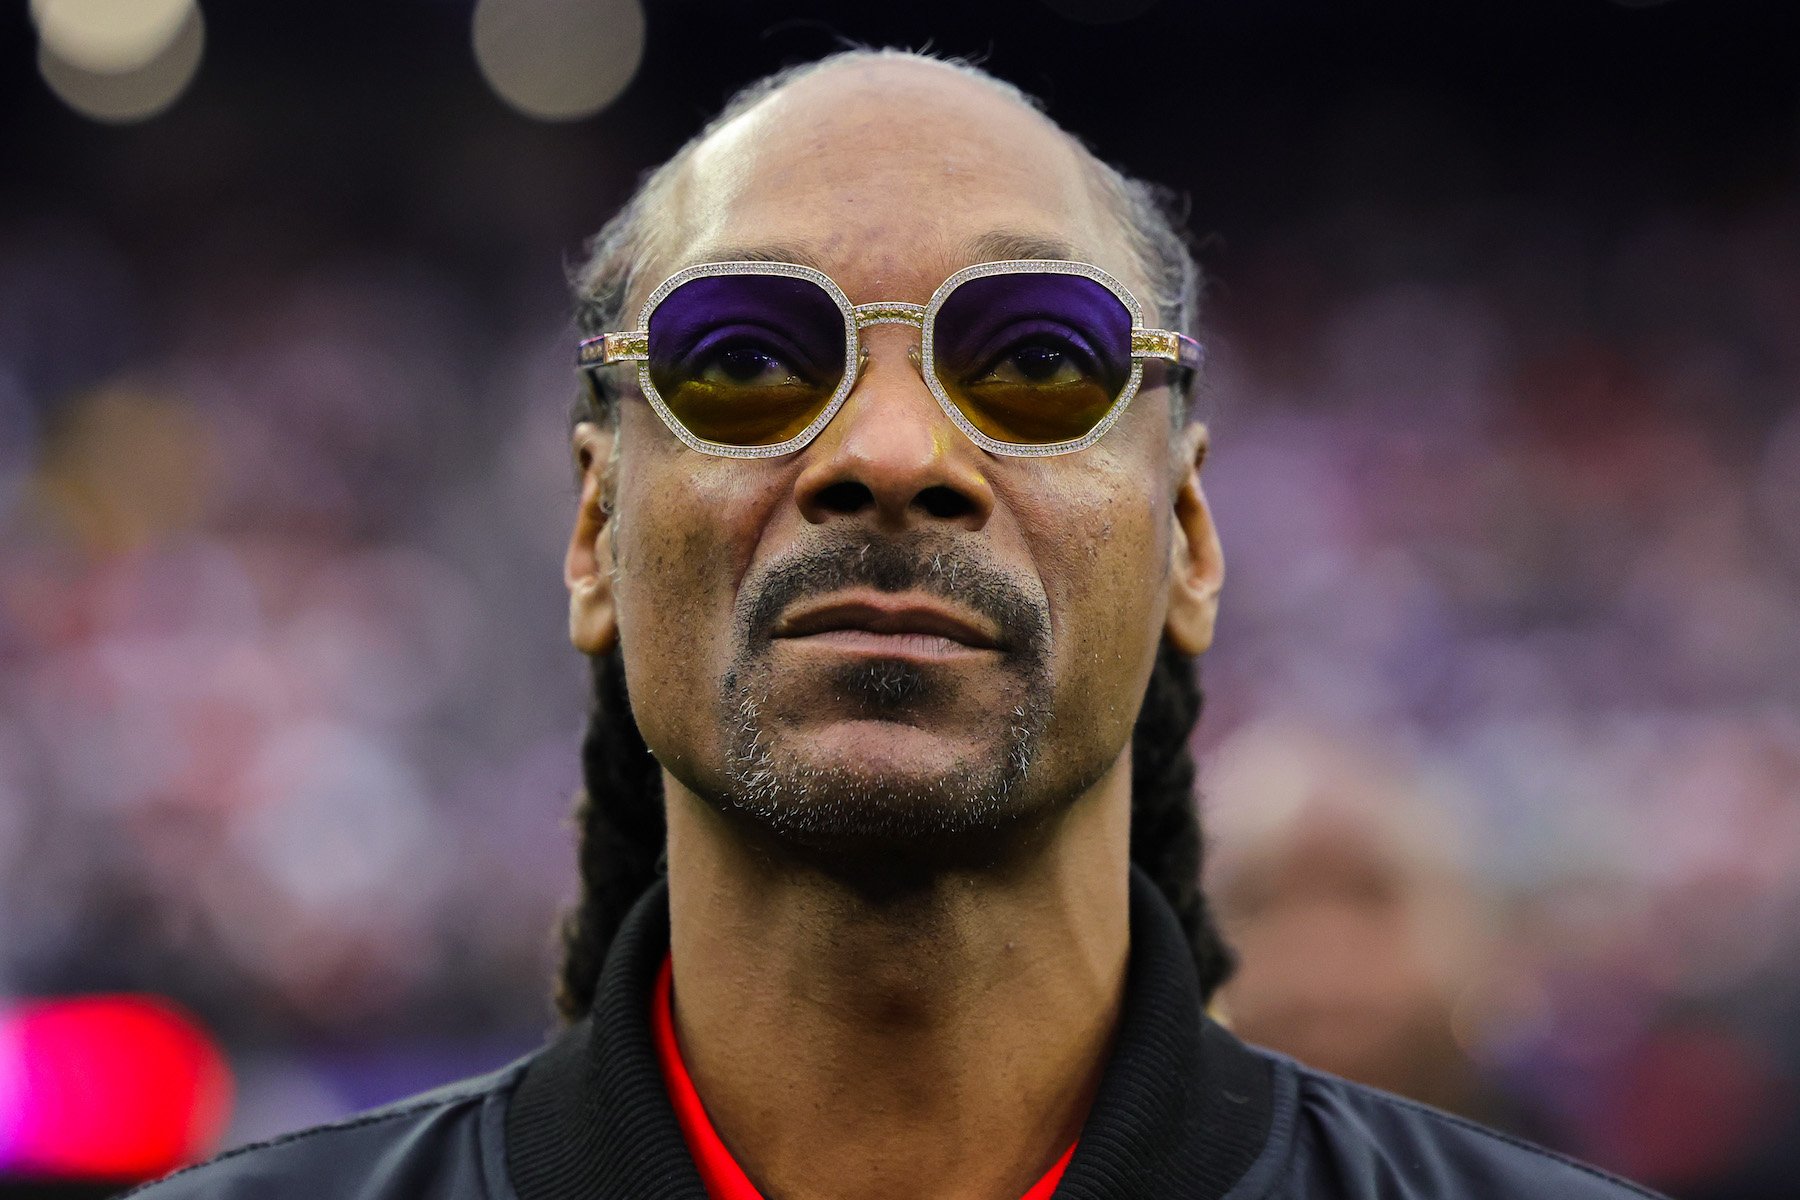 Snoop Dogg, who has yet to be honored by the Grammys, wearing sunglasses